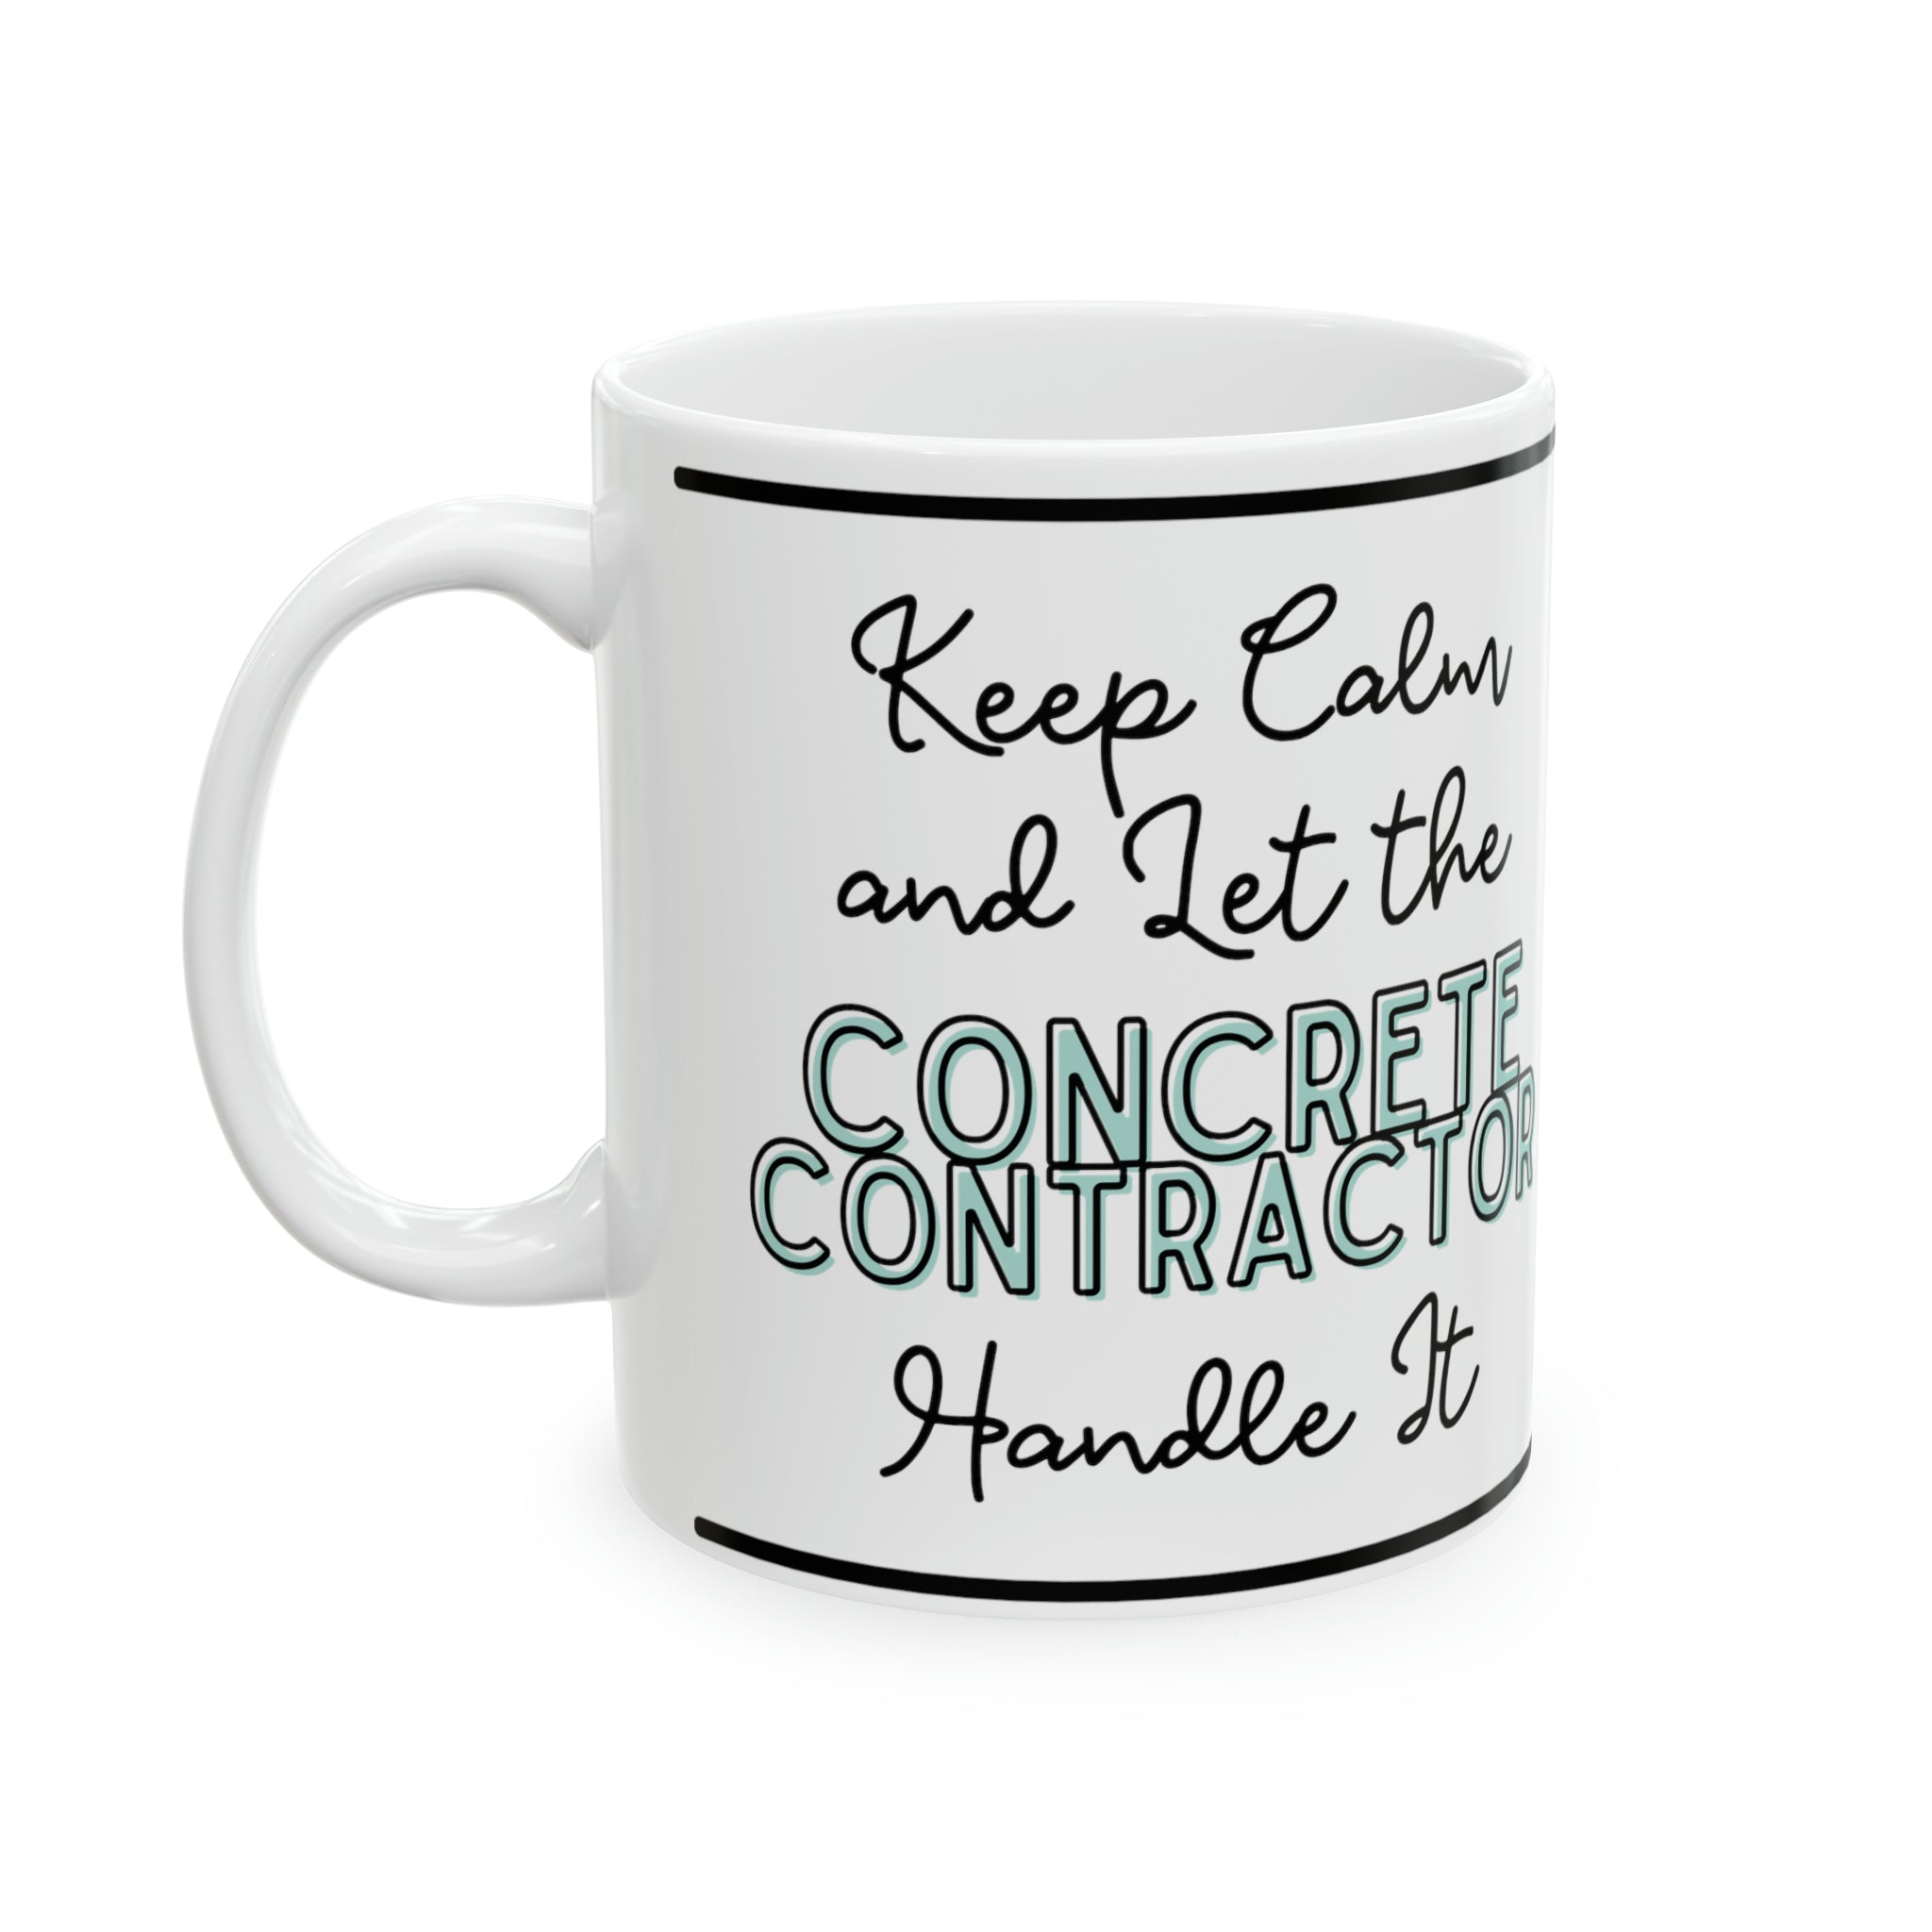 Keep Calm and let the General Contractor Handle It - Ceramic Mug, 11oz